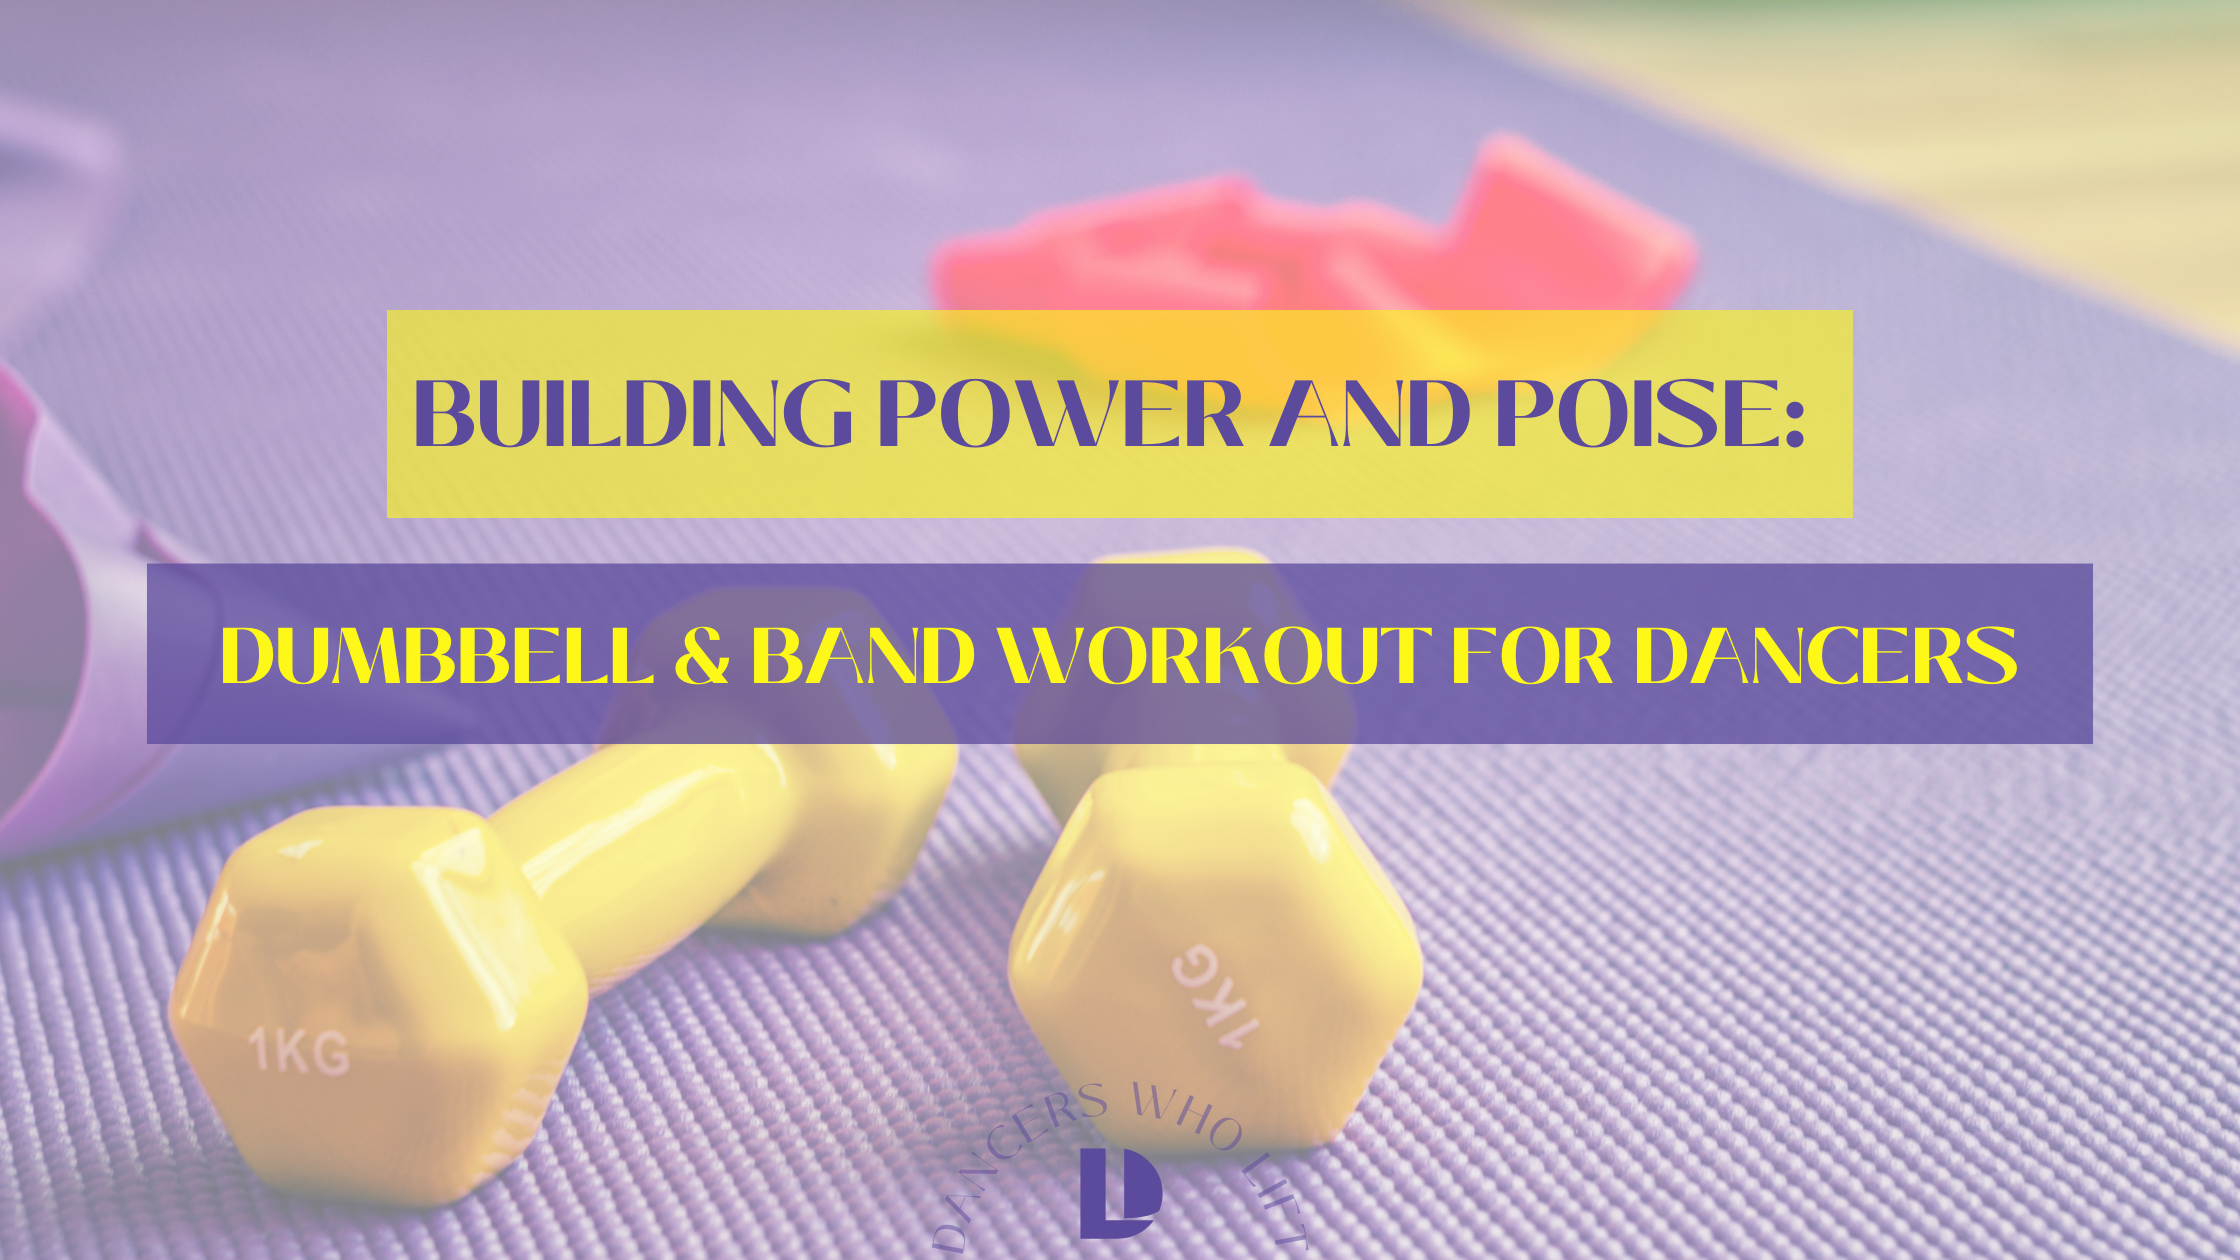 building power and poise: dumbbell and band workout for dancers